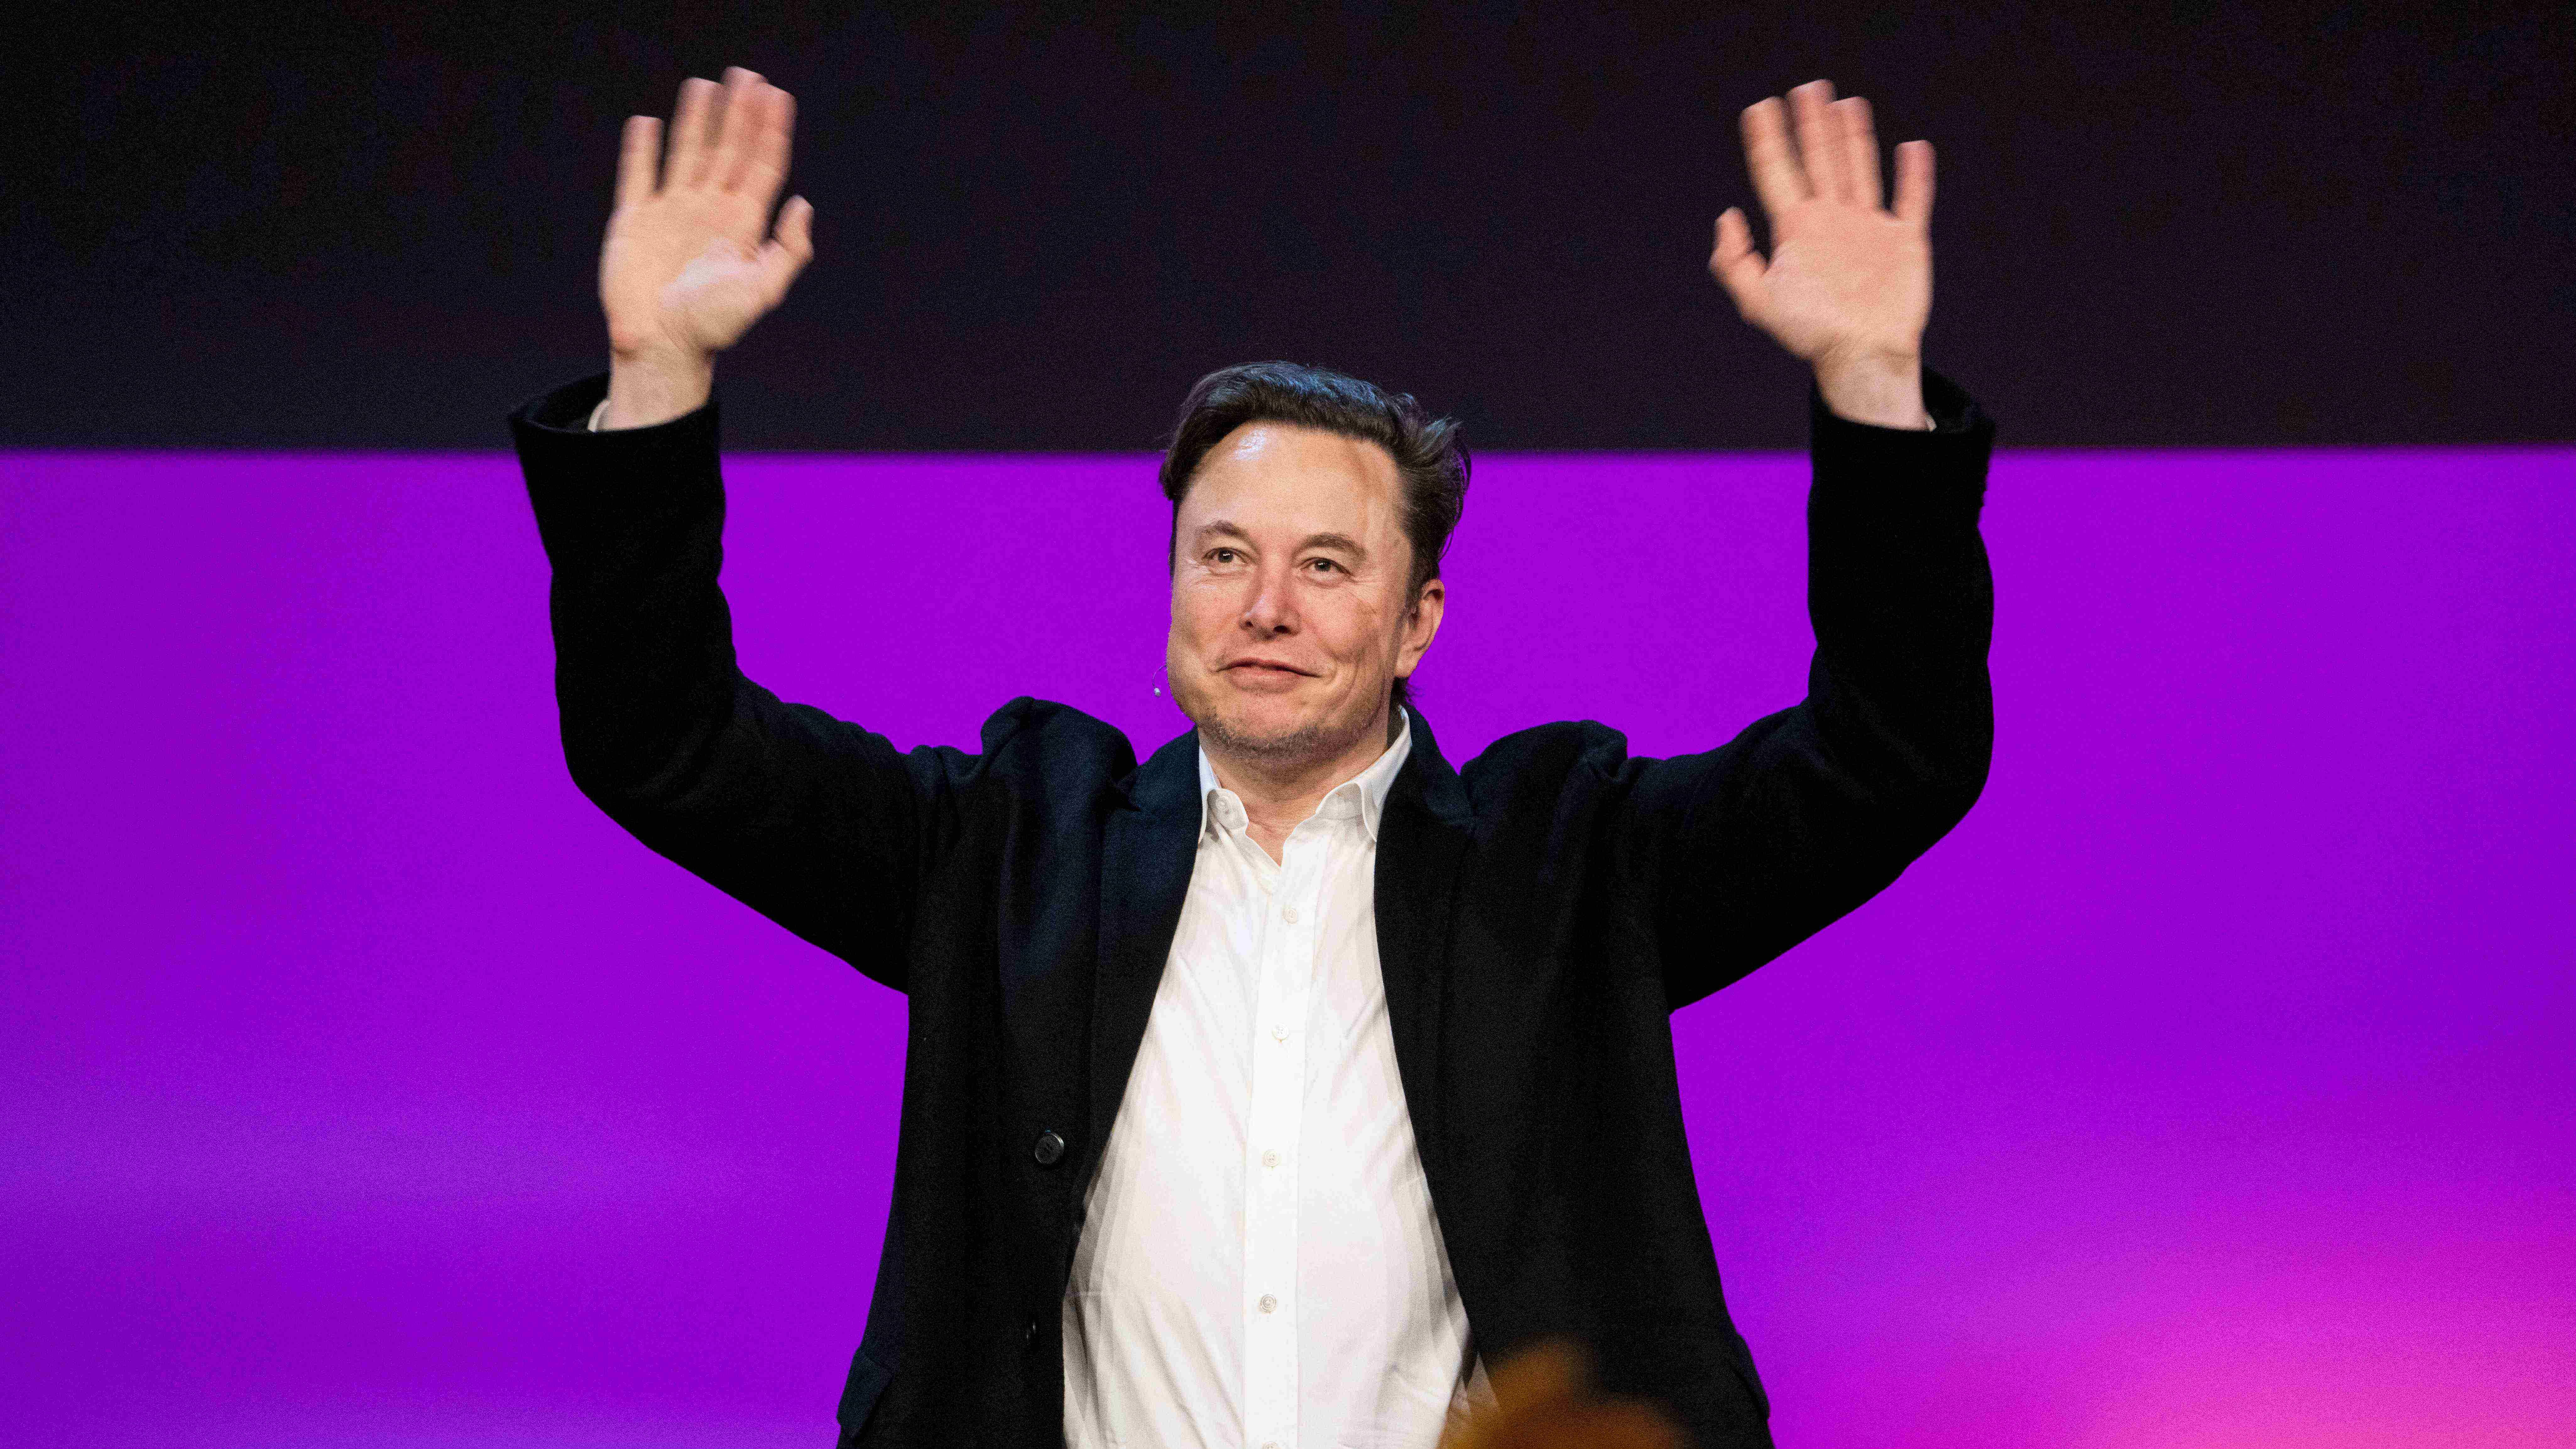 Musk has just about $3 billion in cash and somewhat liquid assets, according to Bloomberg estimates.Credit: AFP Photo